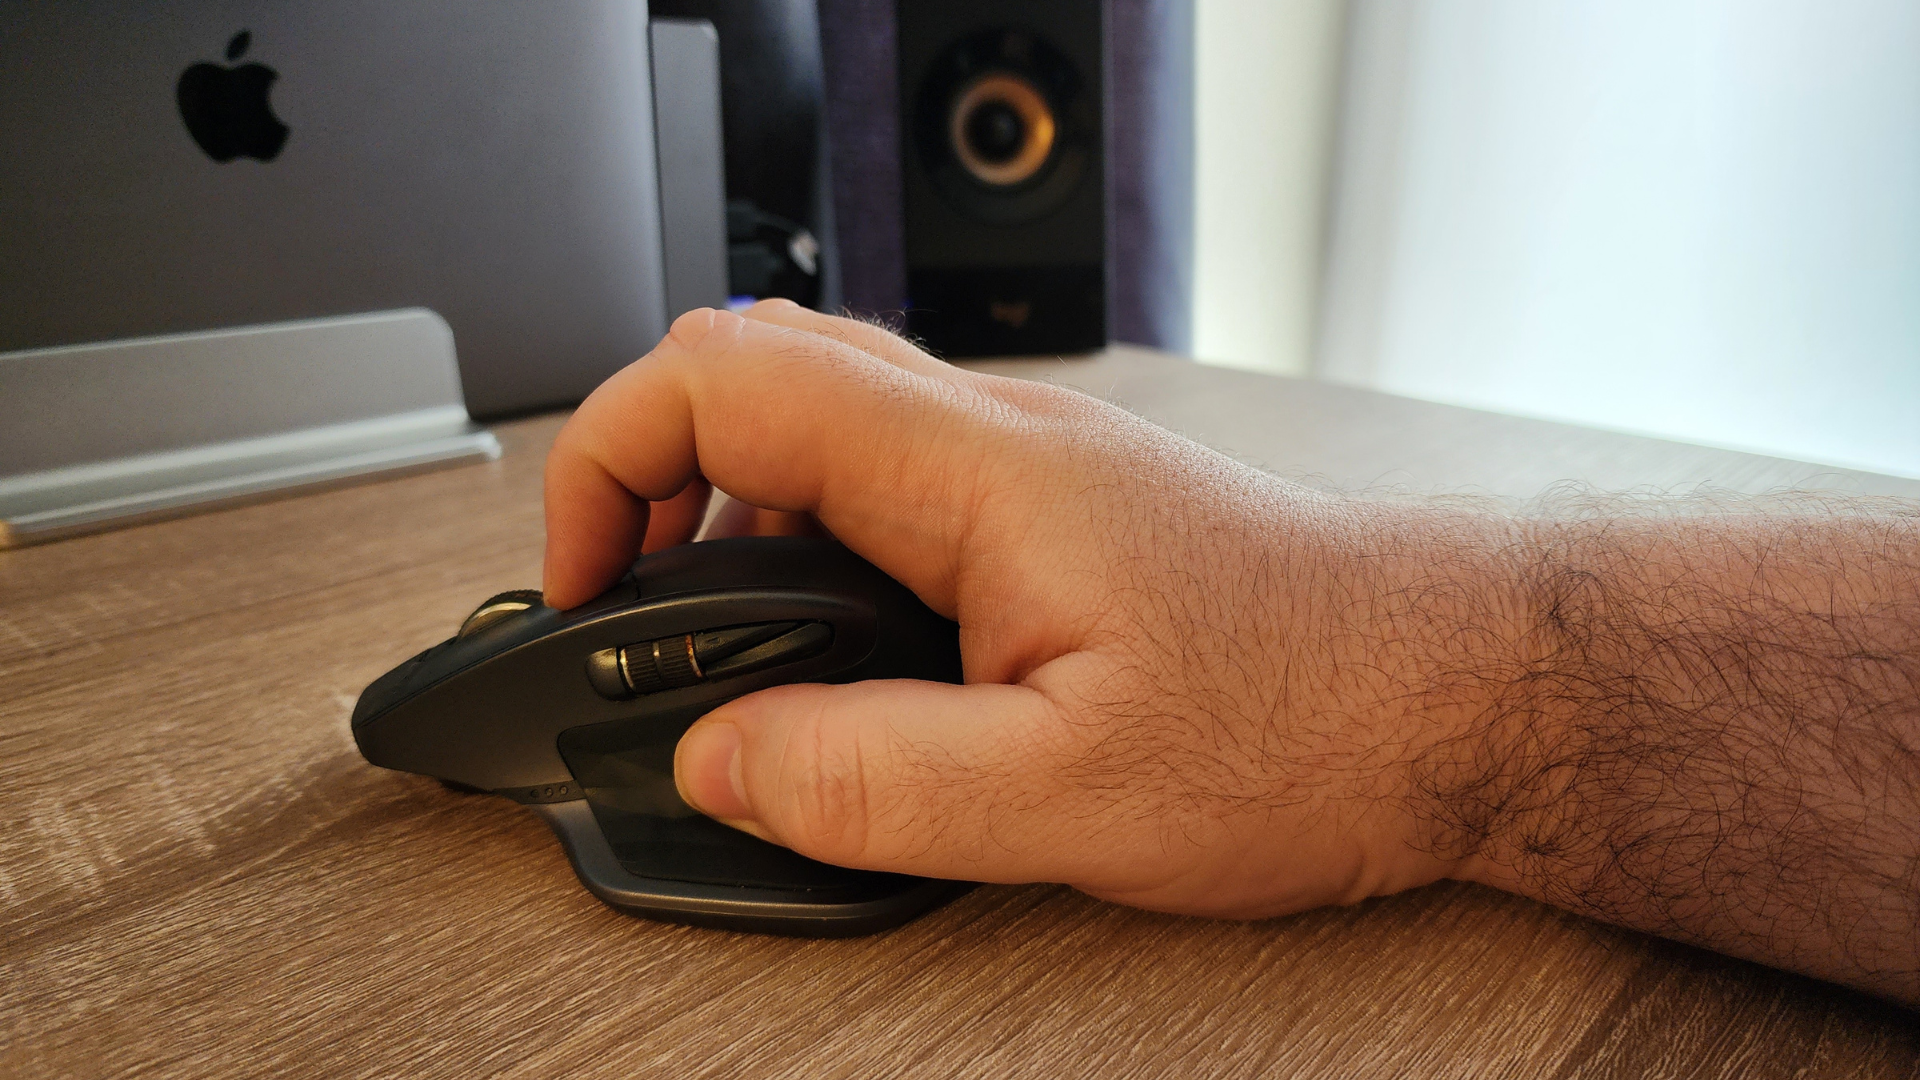 Hand resting on mouse in claw grip